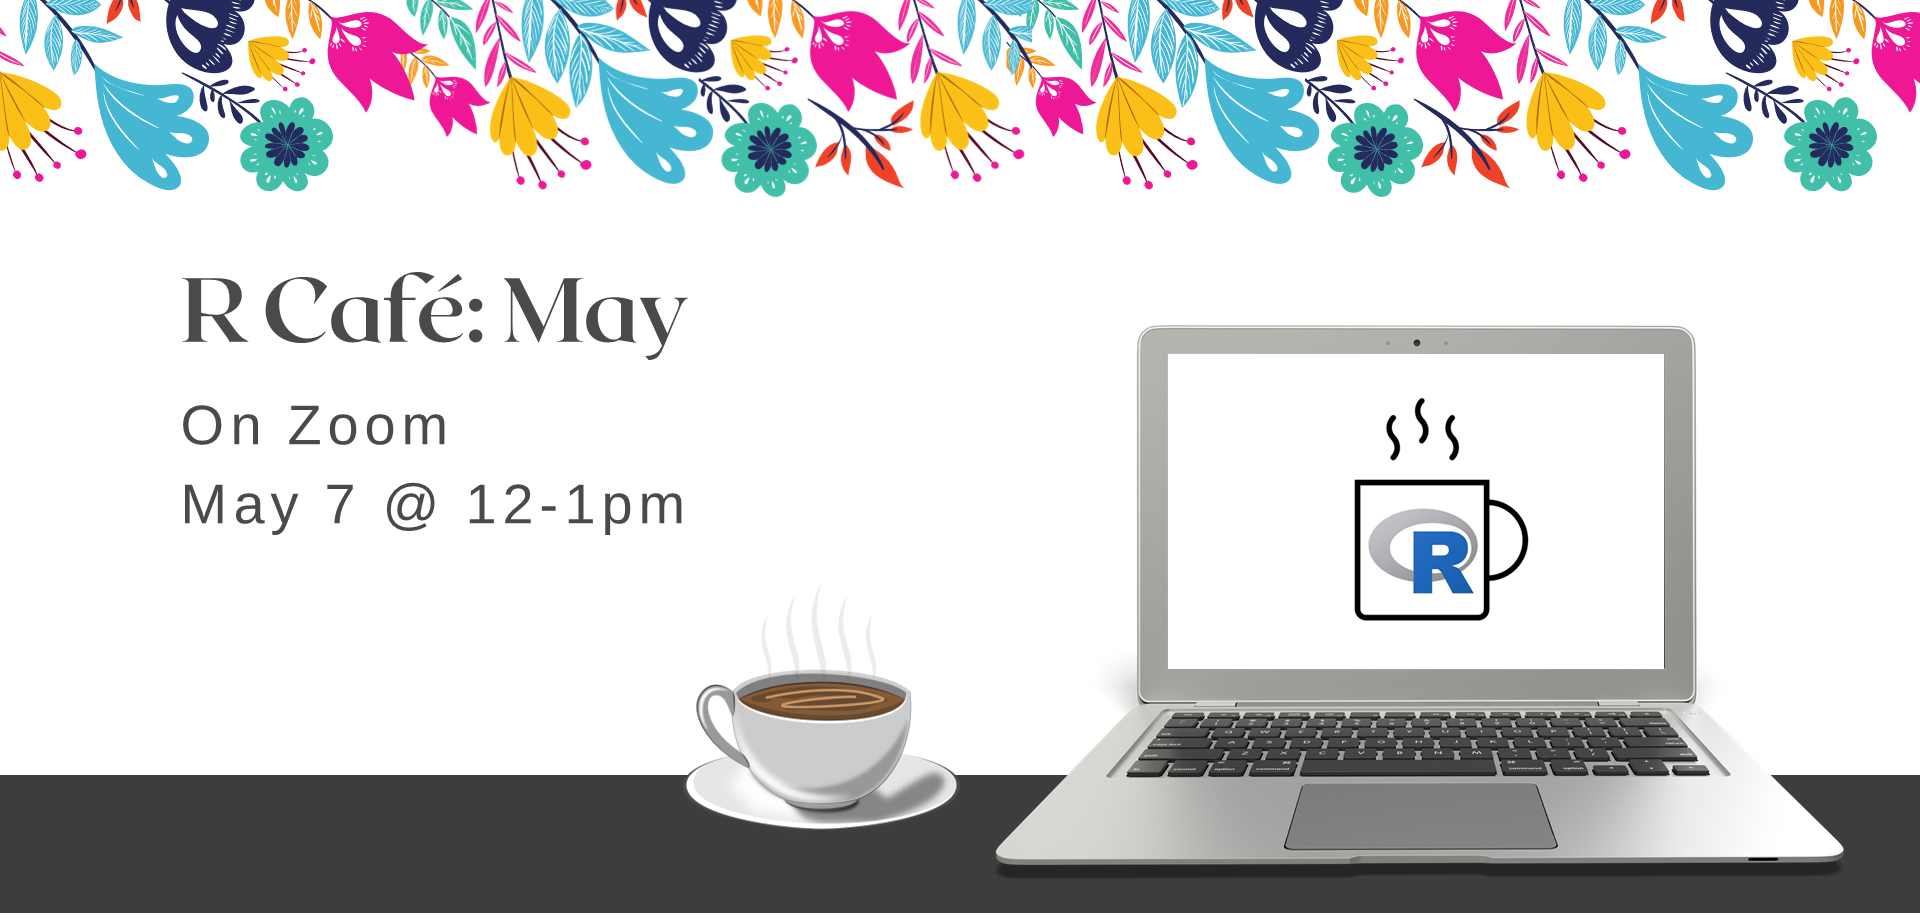 laptop with R Café logo, next to a cup of coffee and border of flowers above. Text: R Café May on Zoom, May 7 at 12 to 1 pm